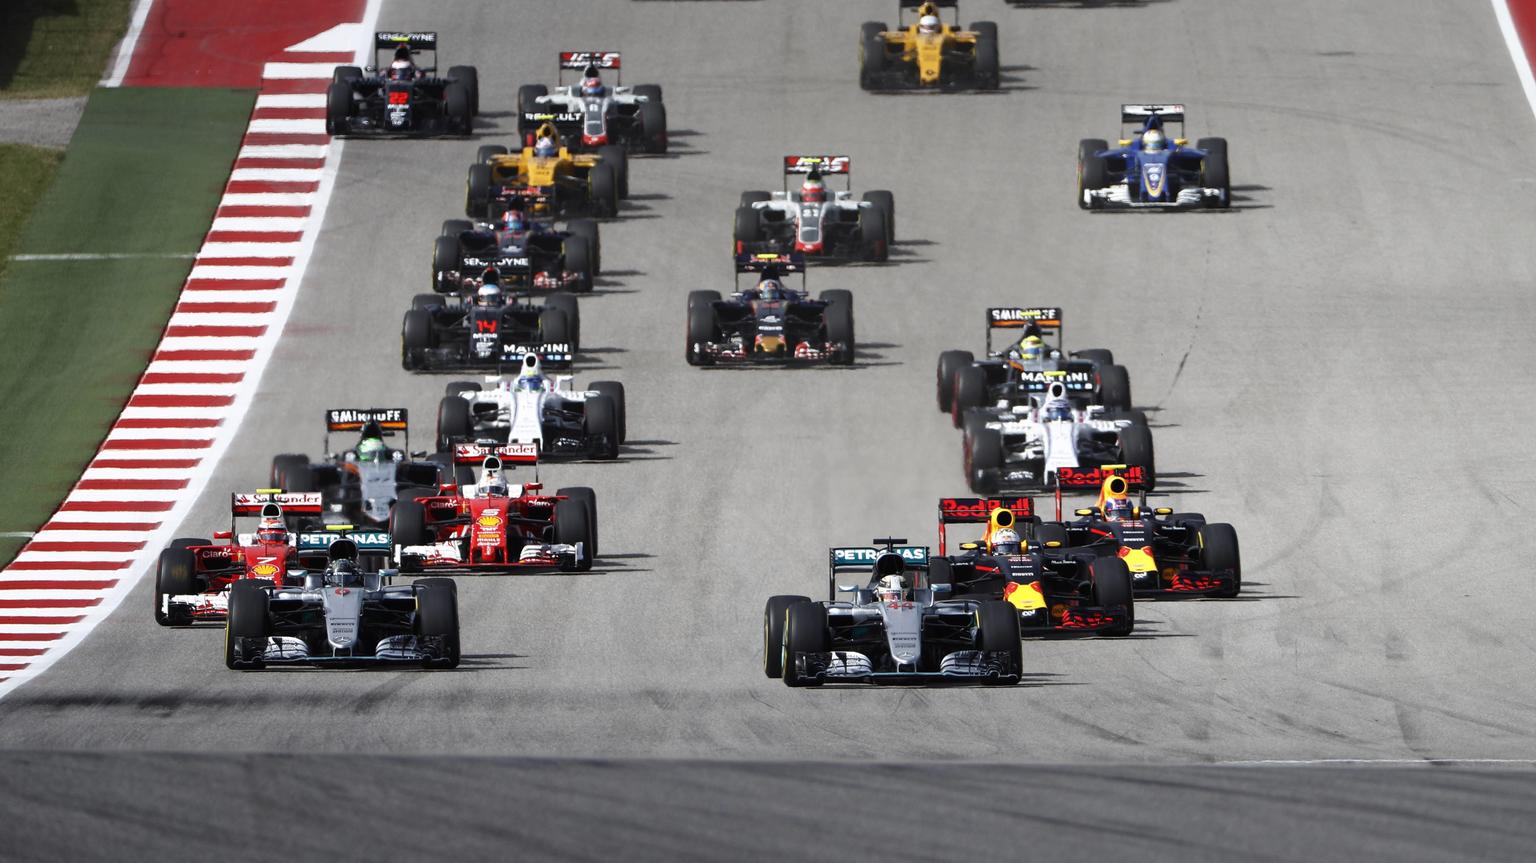 Circuit of the Americas, Austin Texas, USA. Sunday 23 October 2016. Lewis Hamilton, Mercedes F1 W07 Hybrid leads Nico Rosberg, Mercedes F1 W07 Hybrid, Daniel Ricciardo, Red Bull Racing RB12 TAG Heuer and the rest of the field at the start of the race